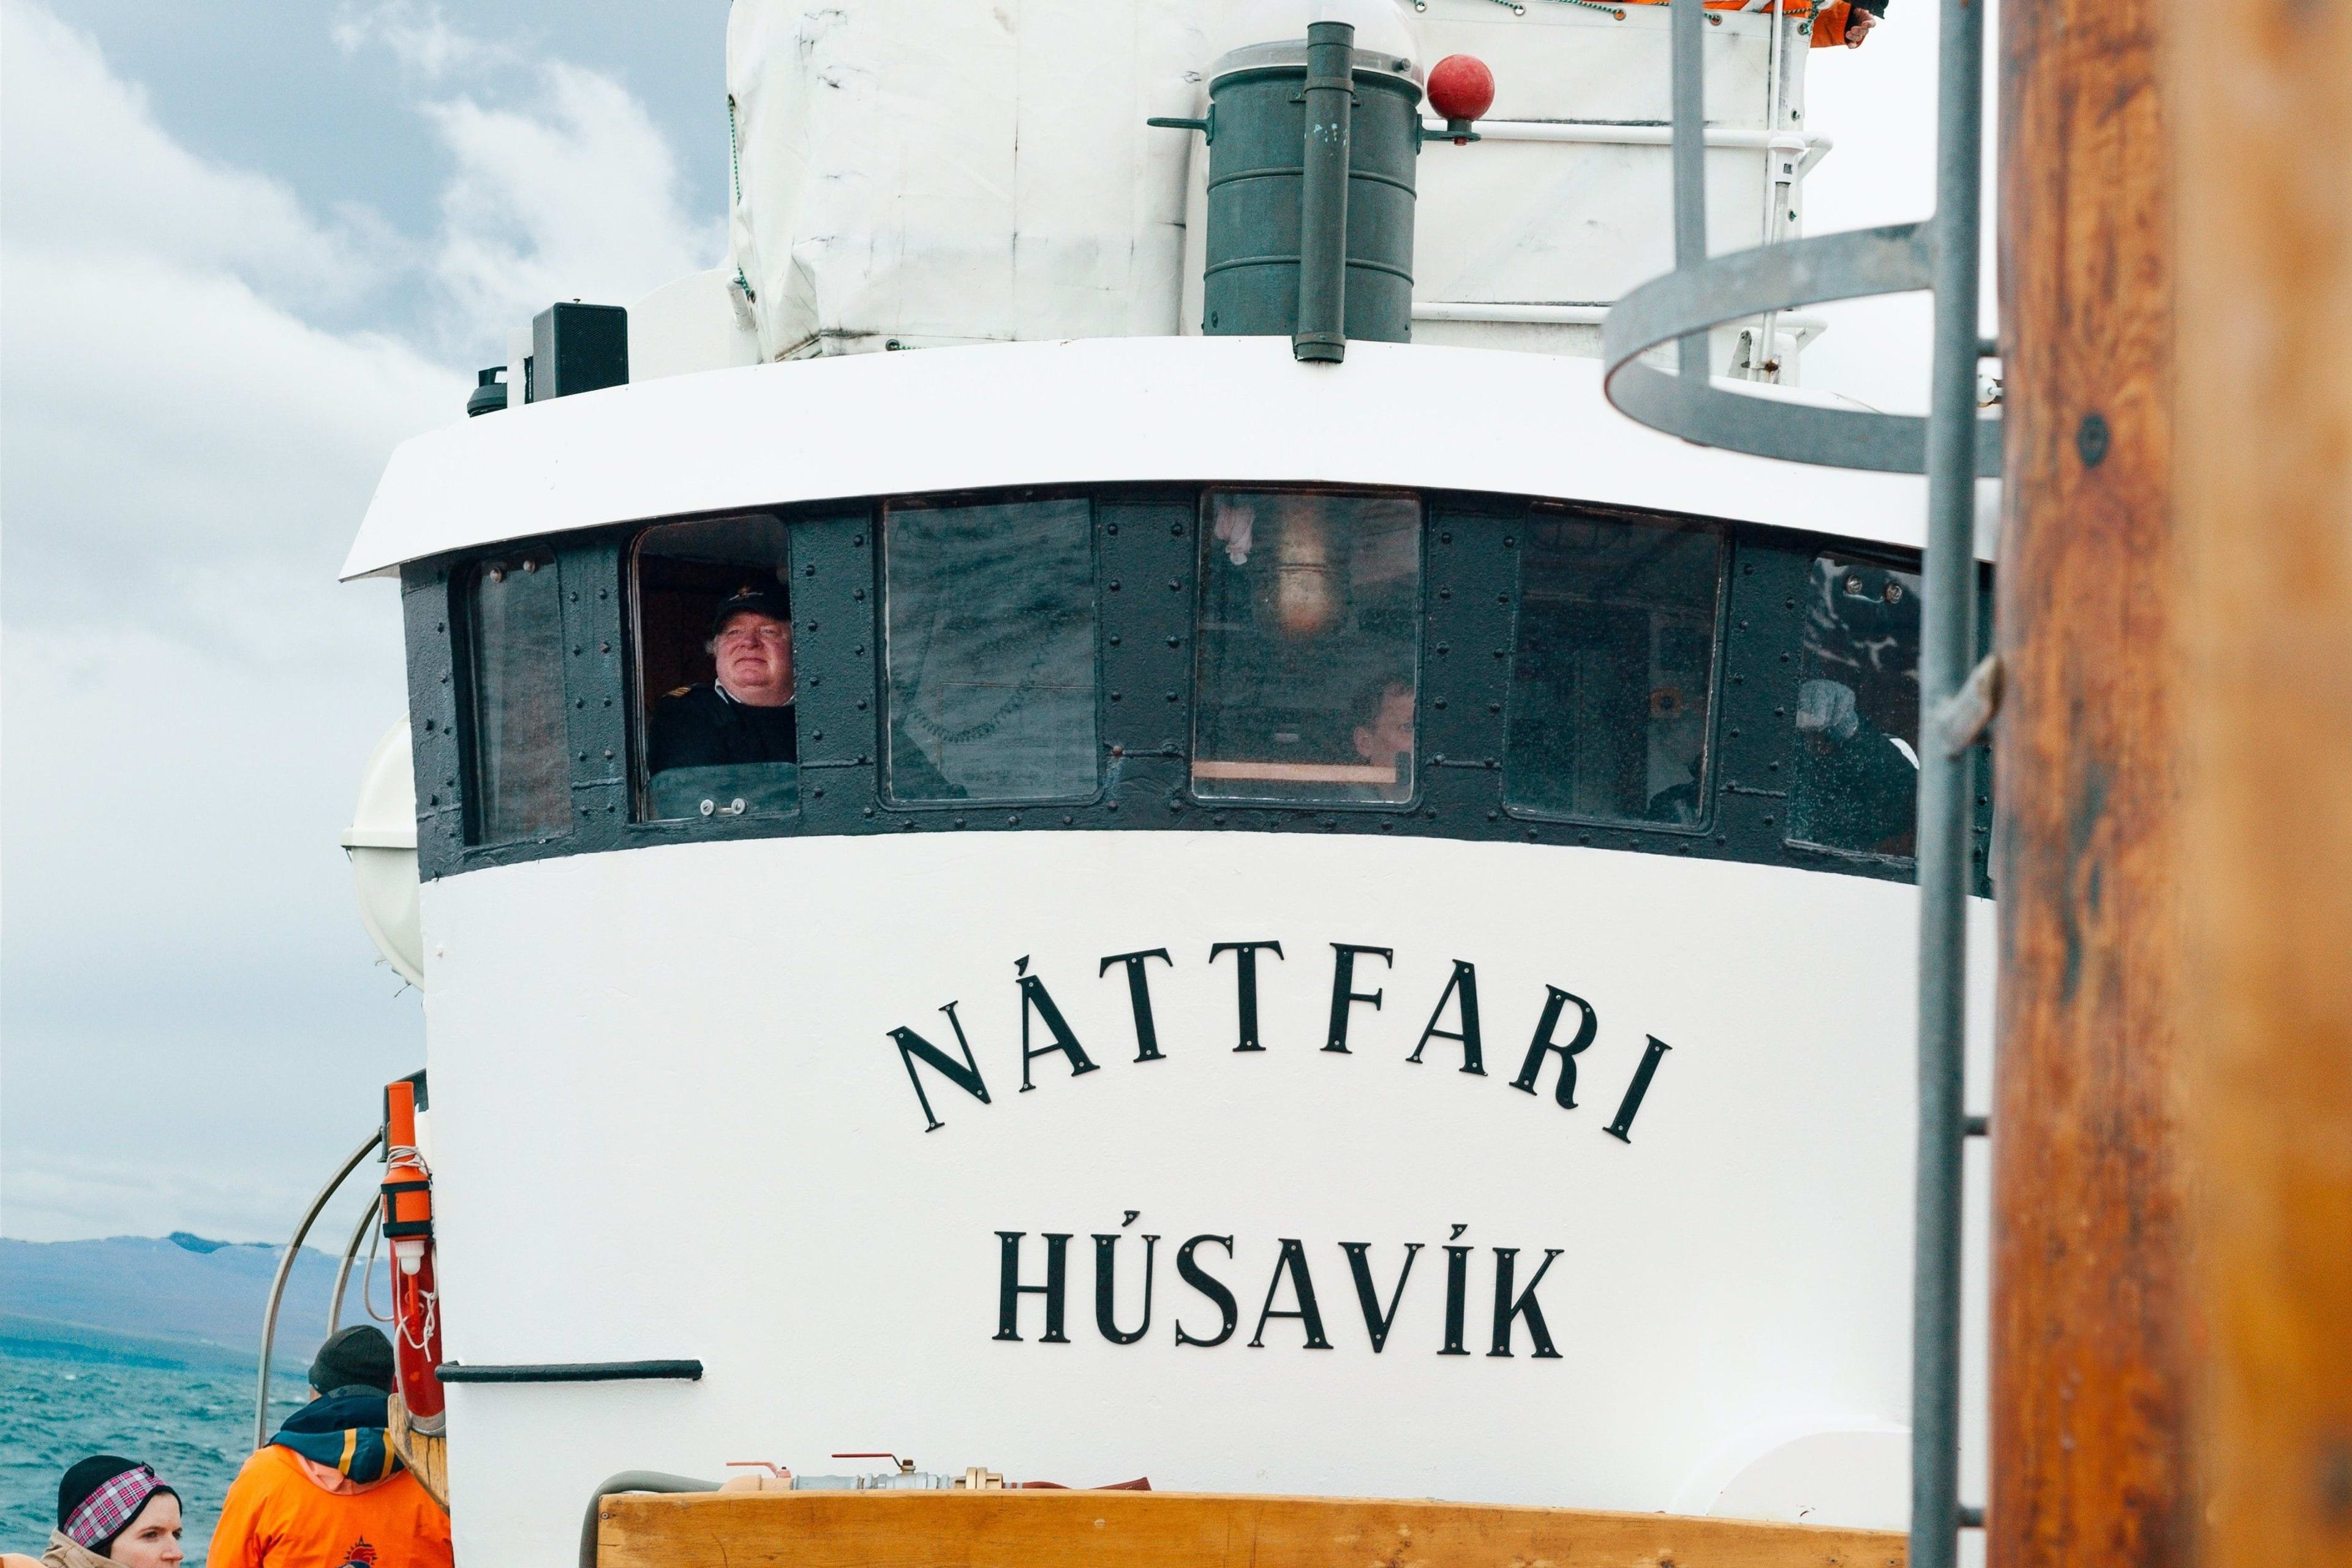 Husavik whale watching boat with people